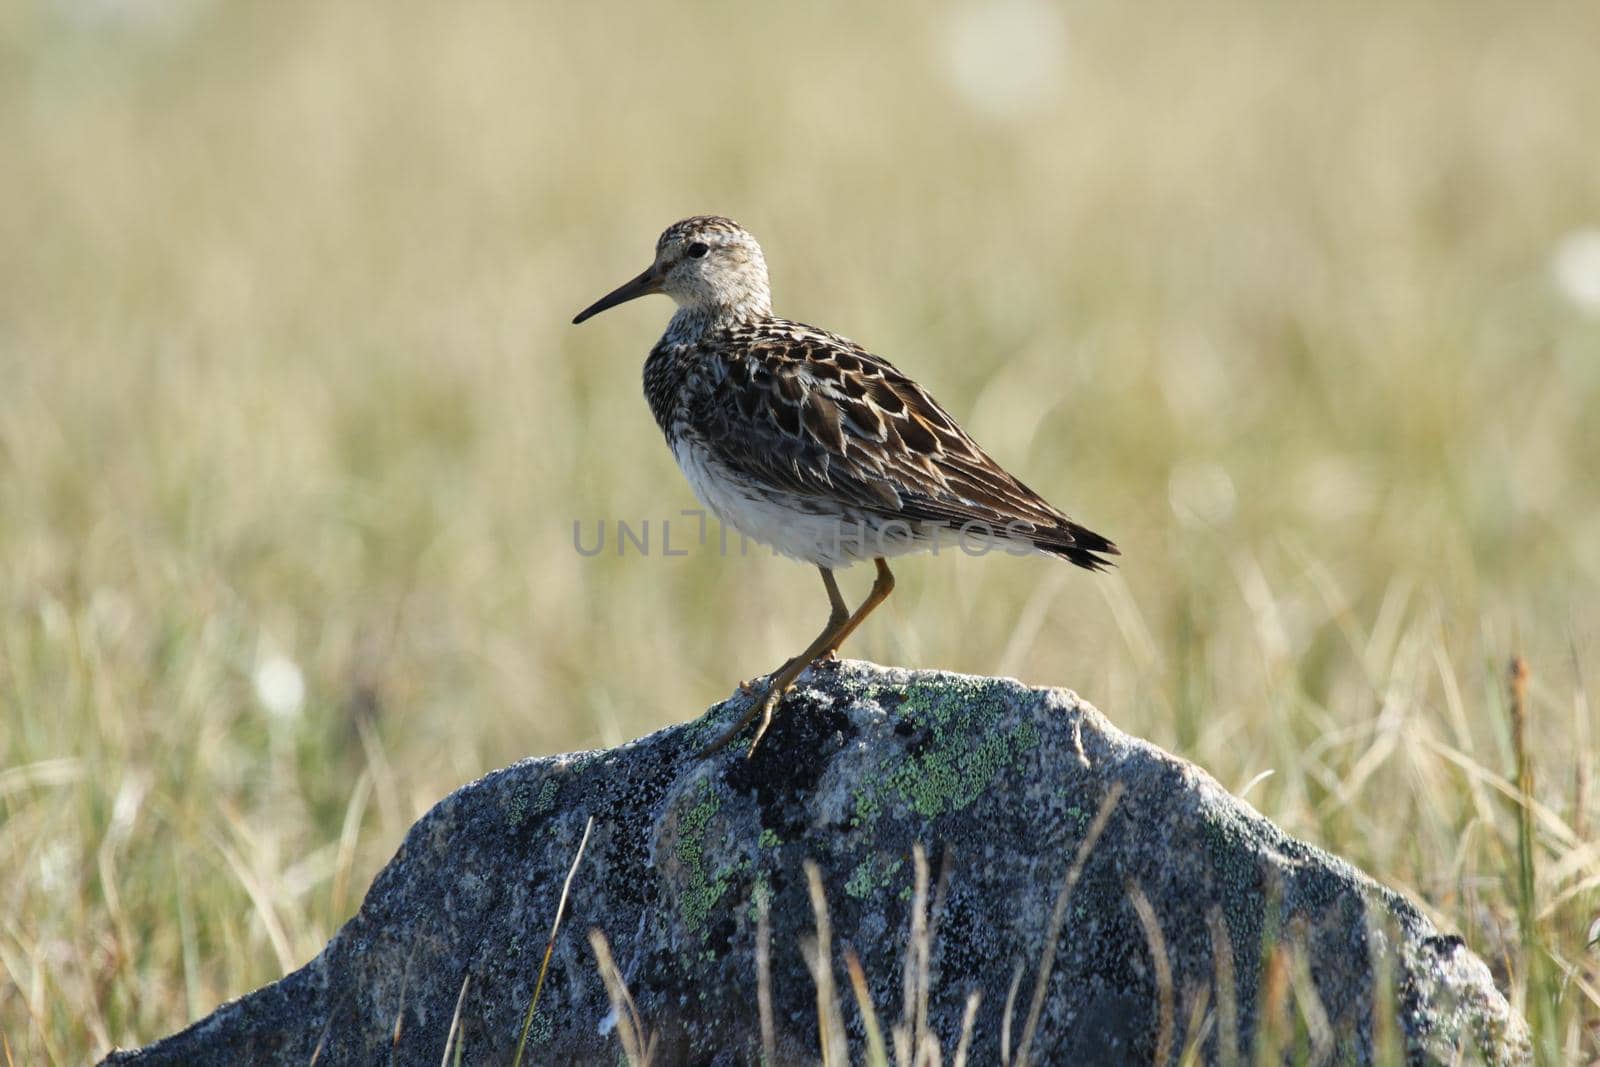 Pectoral sandpiper standing on a rock with tundra grass in the background by Granchinho